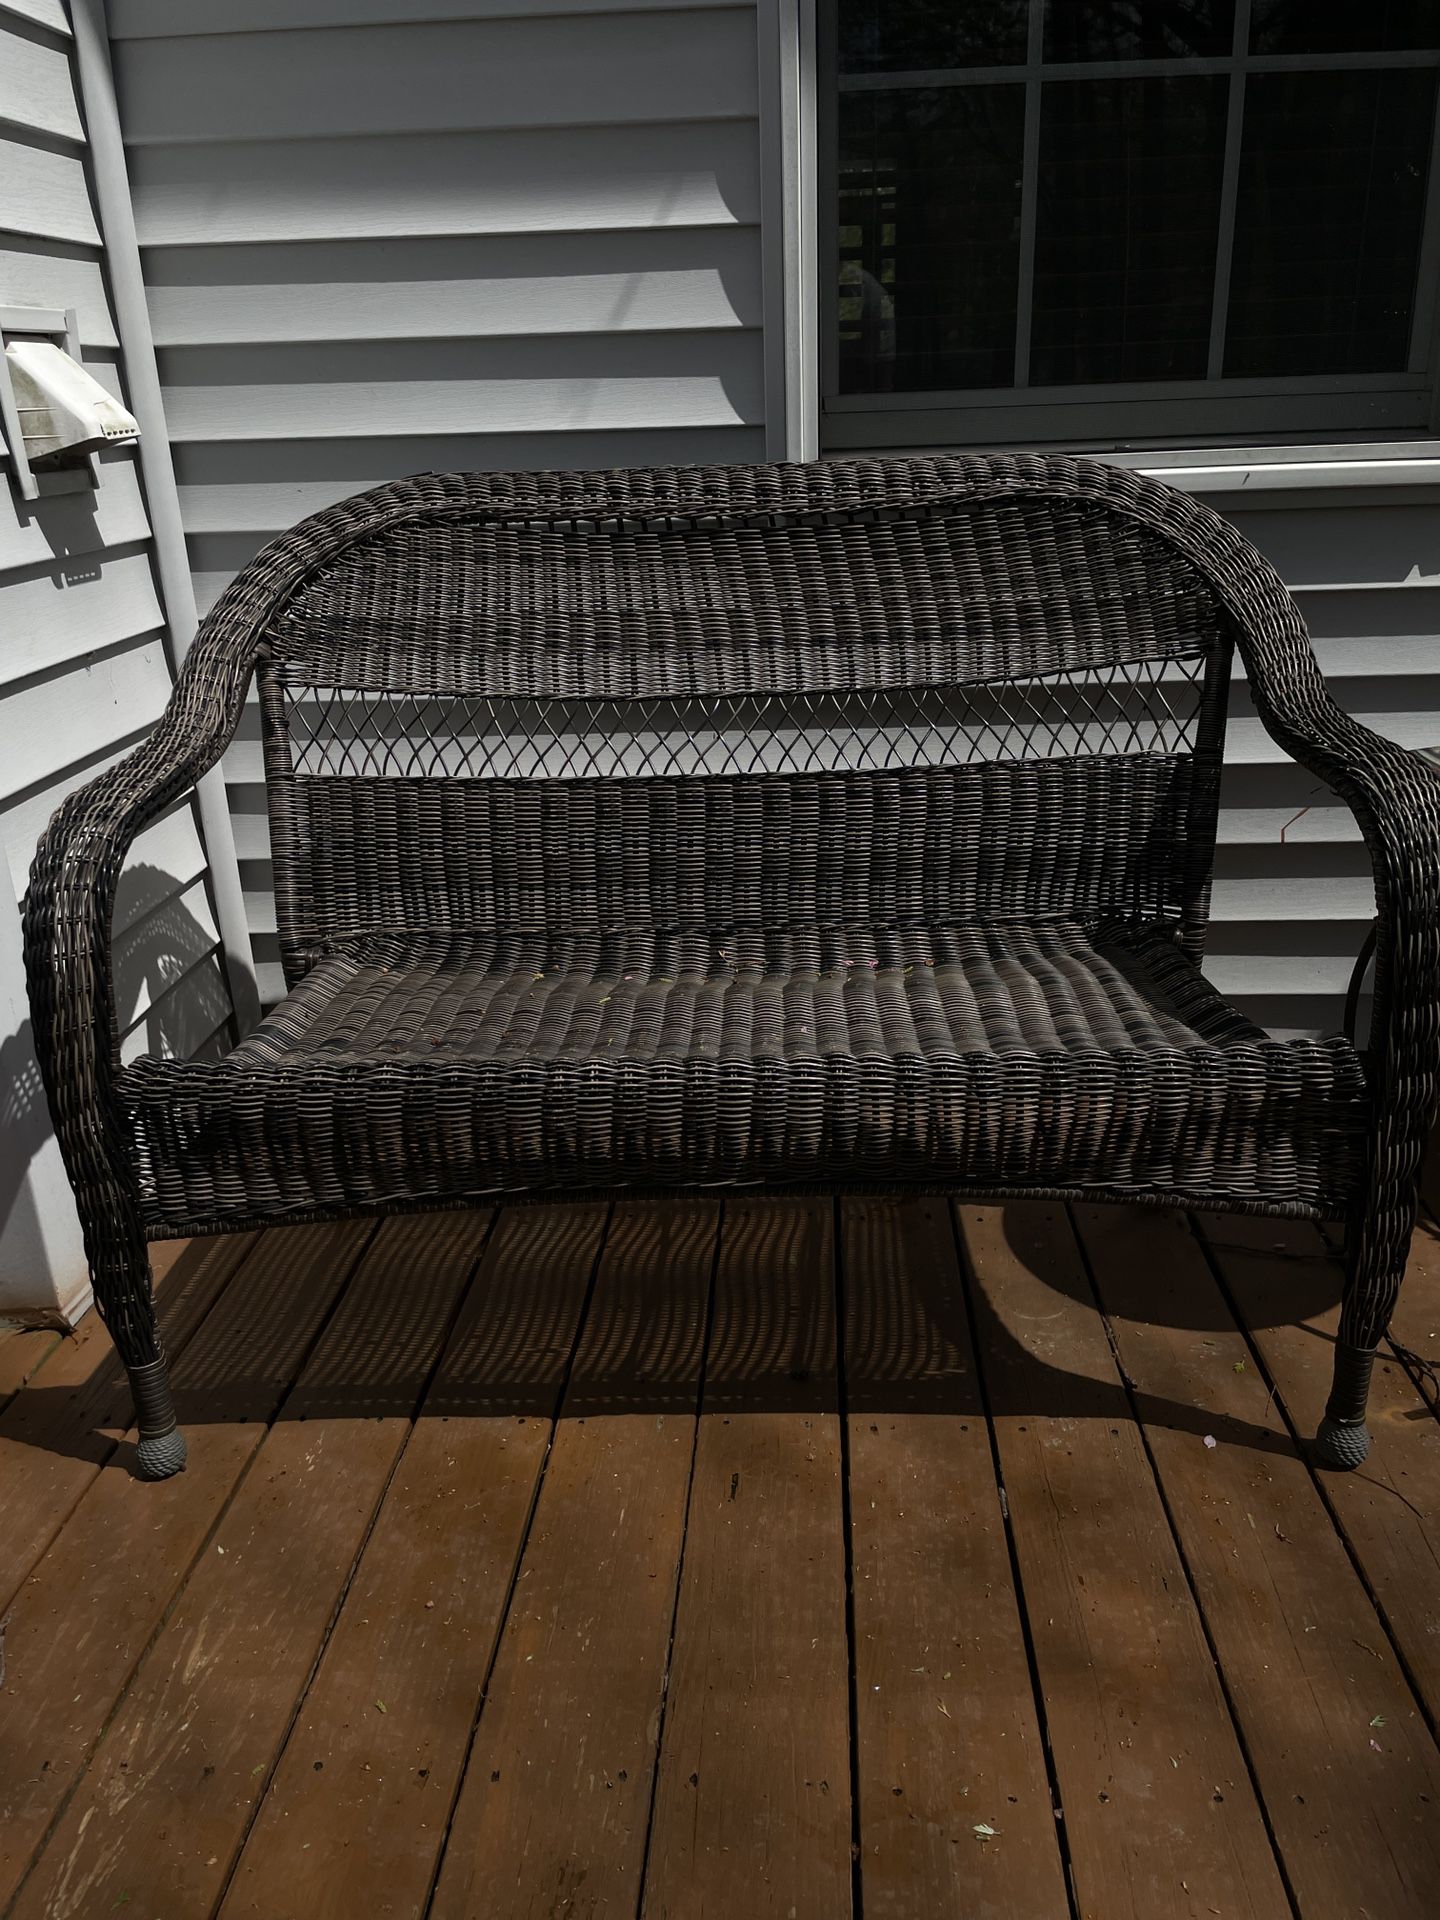 Brown Wicker Furniture From Lowe’s